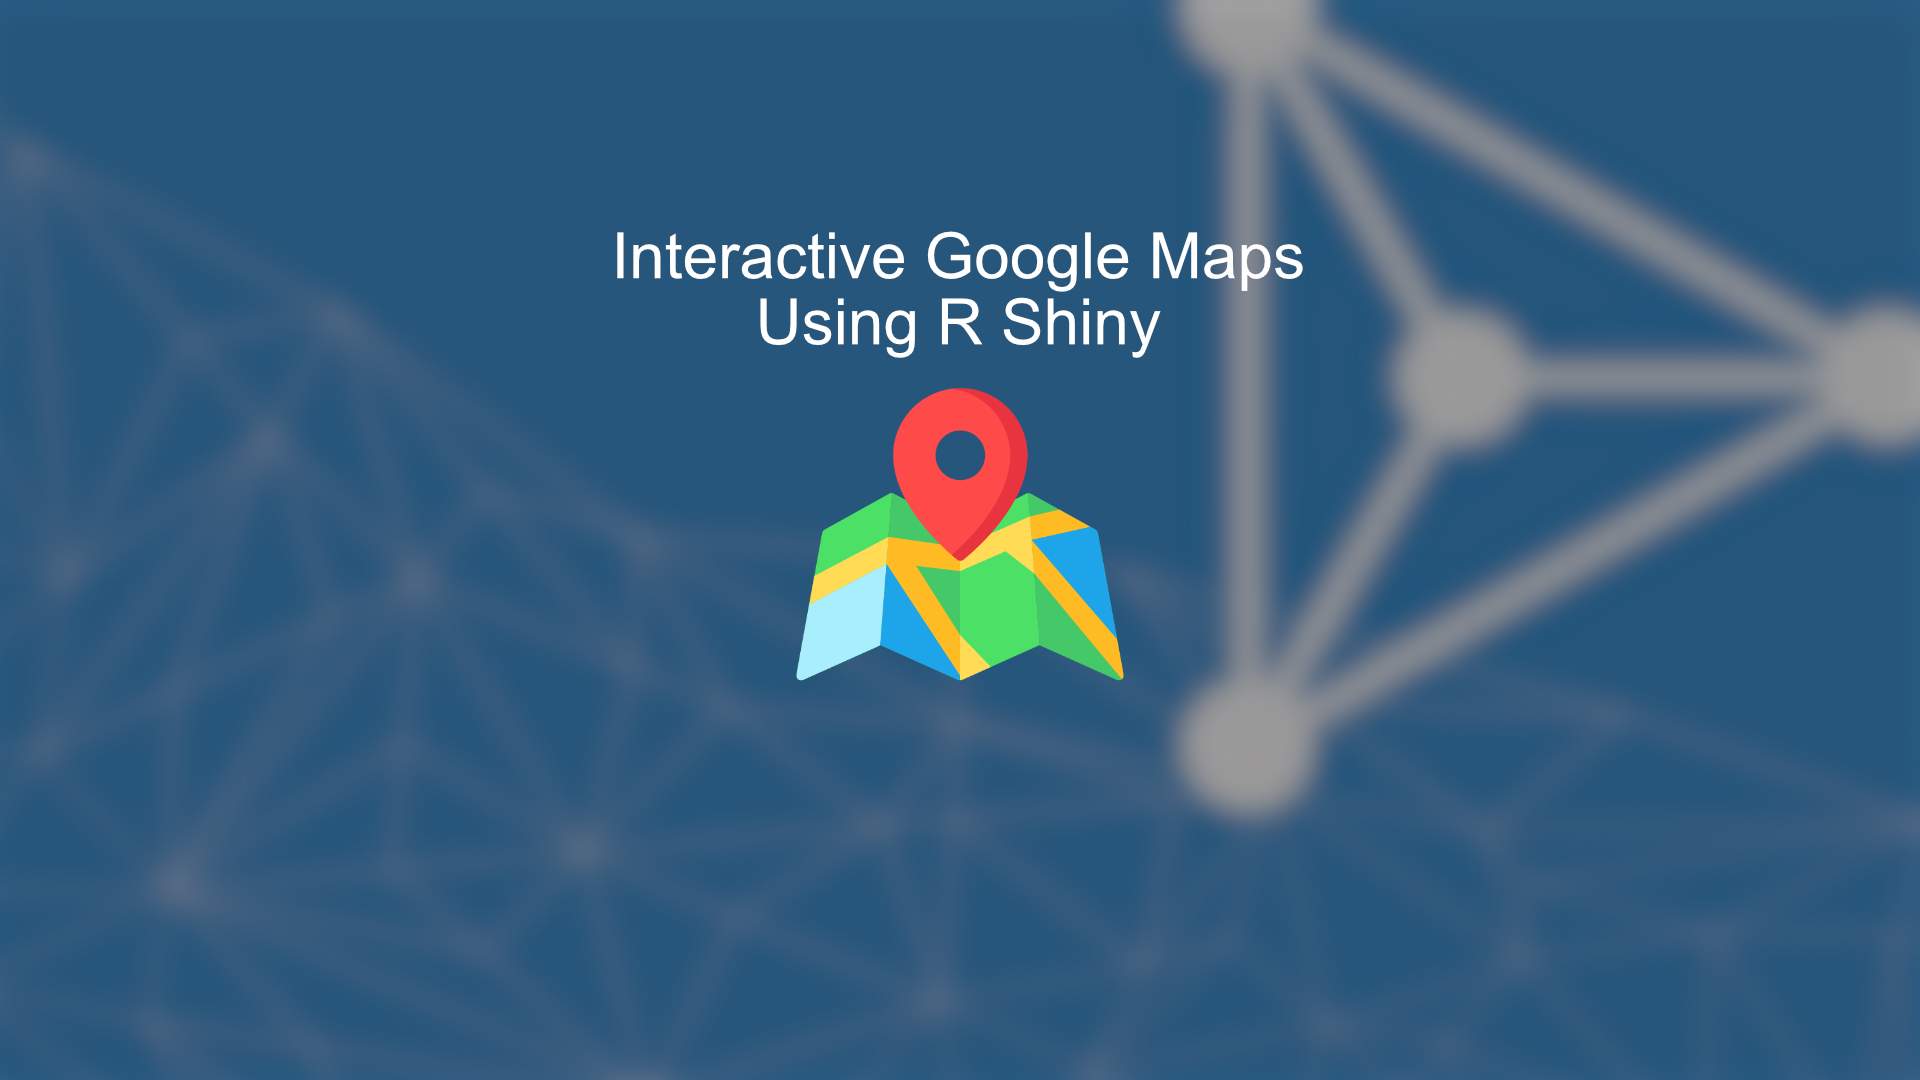 Interactive Google Maps with R Shiny - Article thumbnail